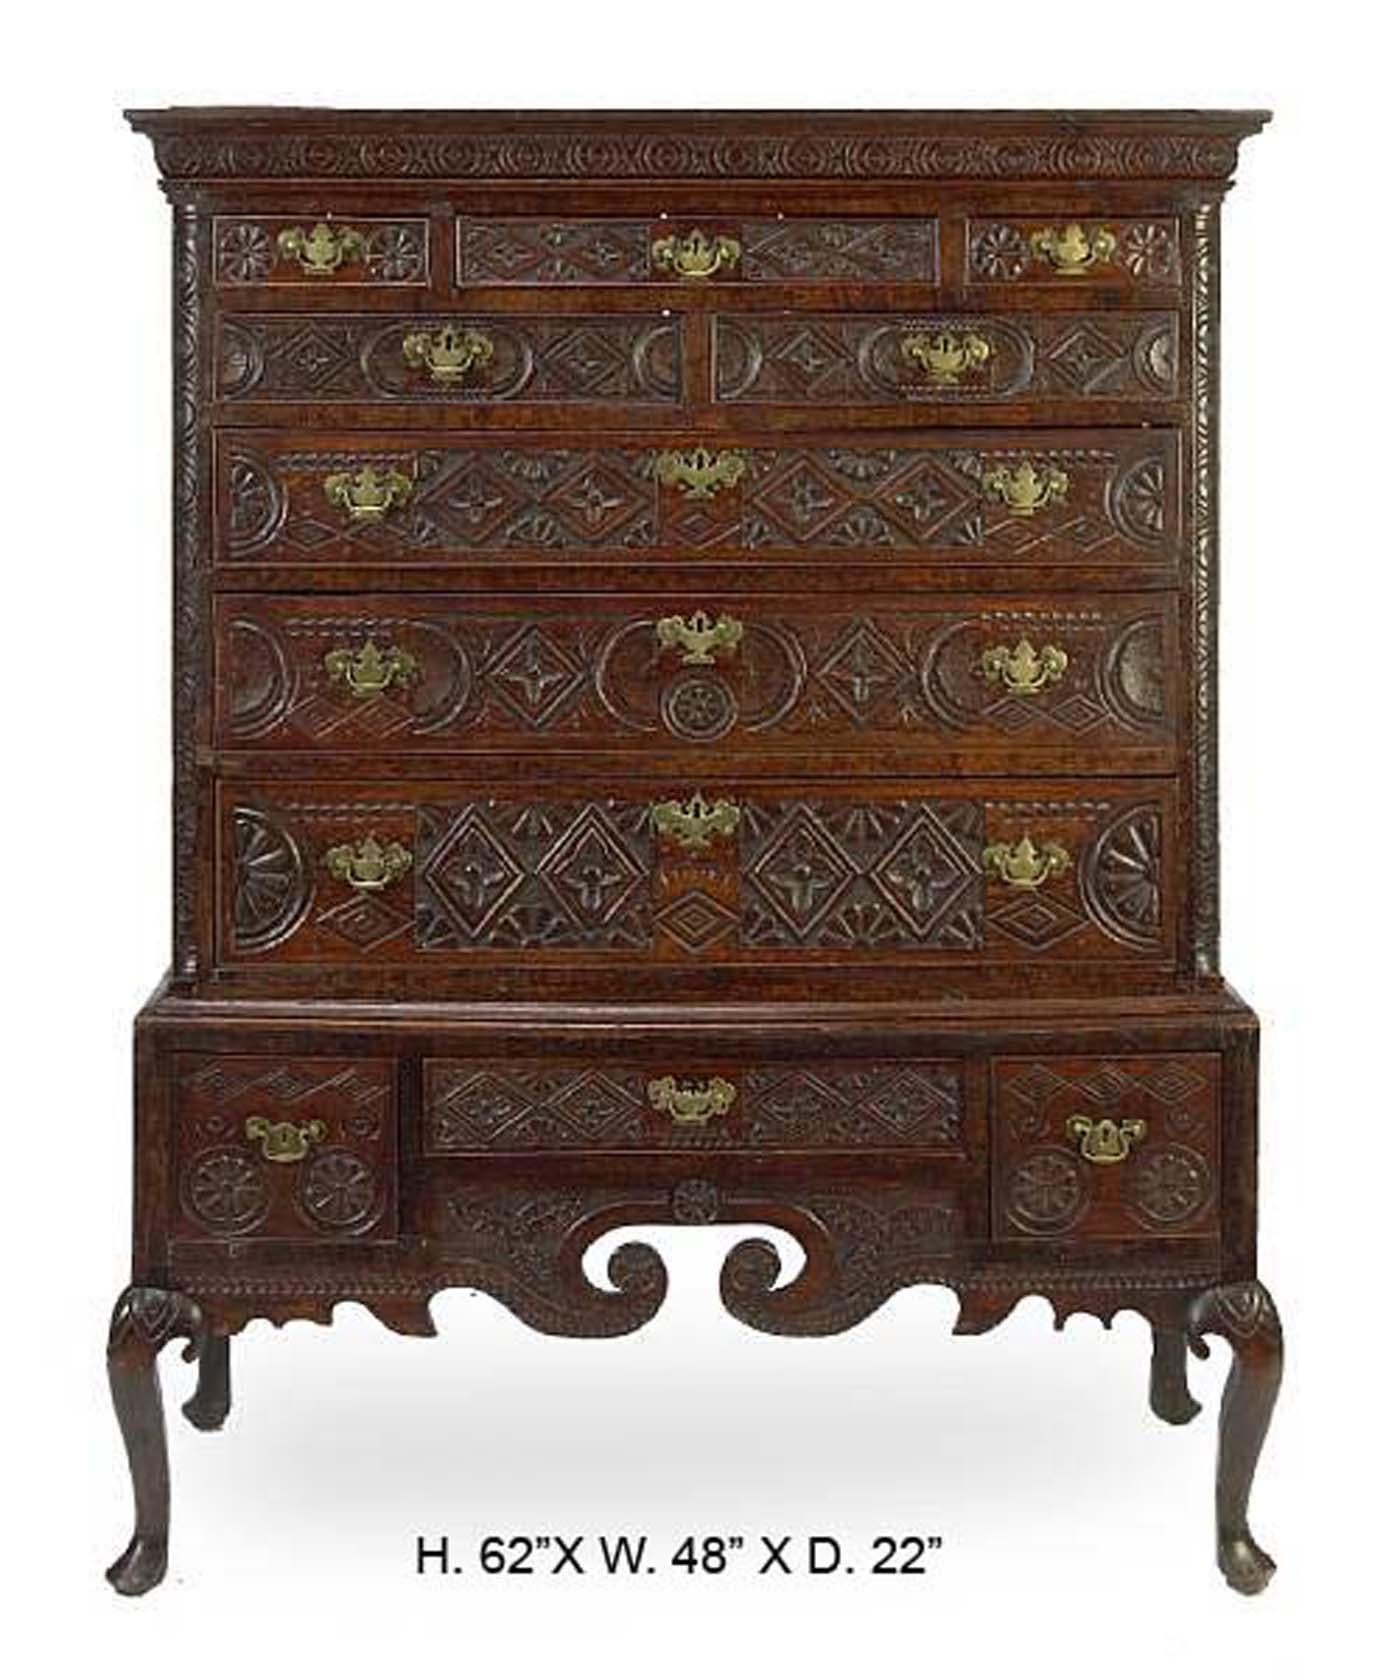 18th century George III carved oak highboy cabinet on stand.
The superstructure is topped by a moulded rectangular cornice over nine graduated drawers heavily carved with entrelacs and mounted with bronze handles, above a conforming support with